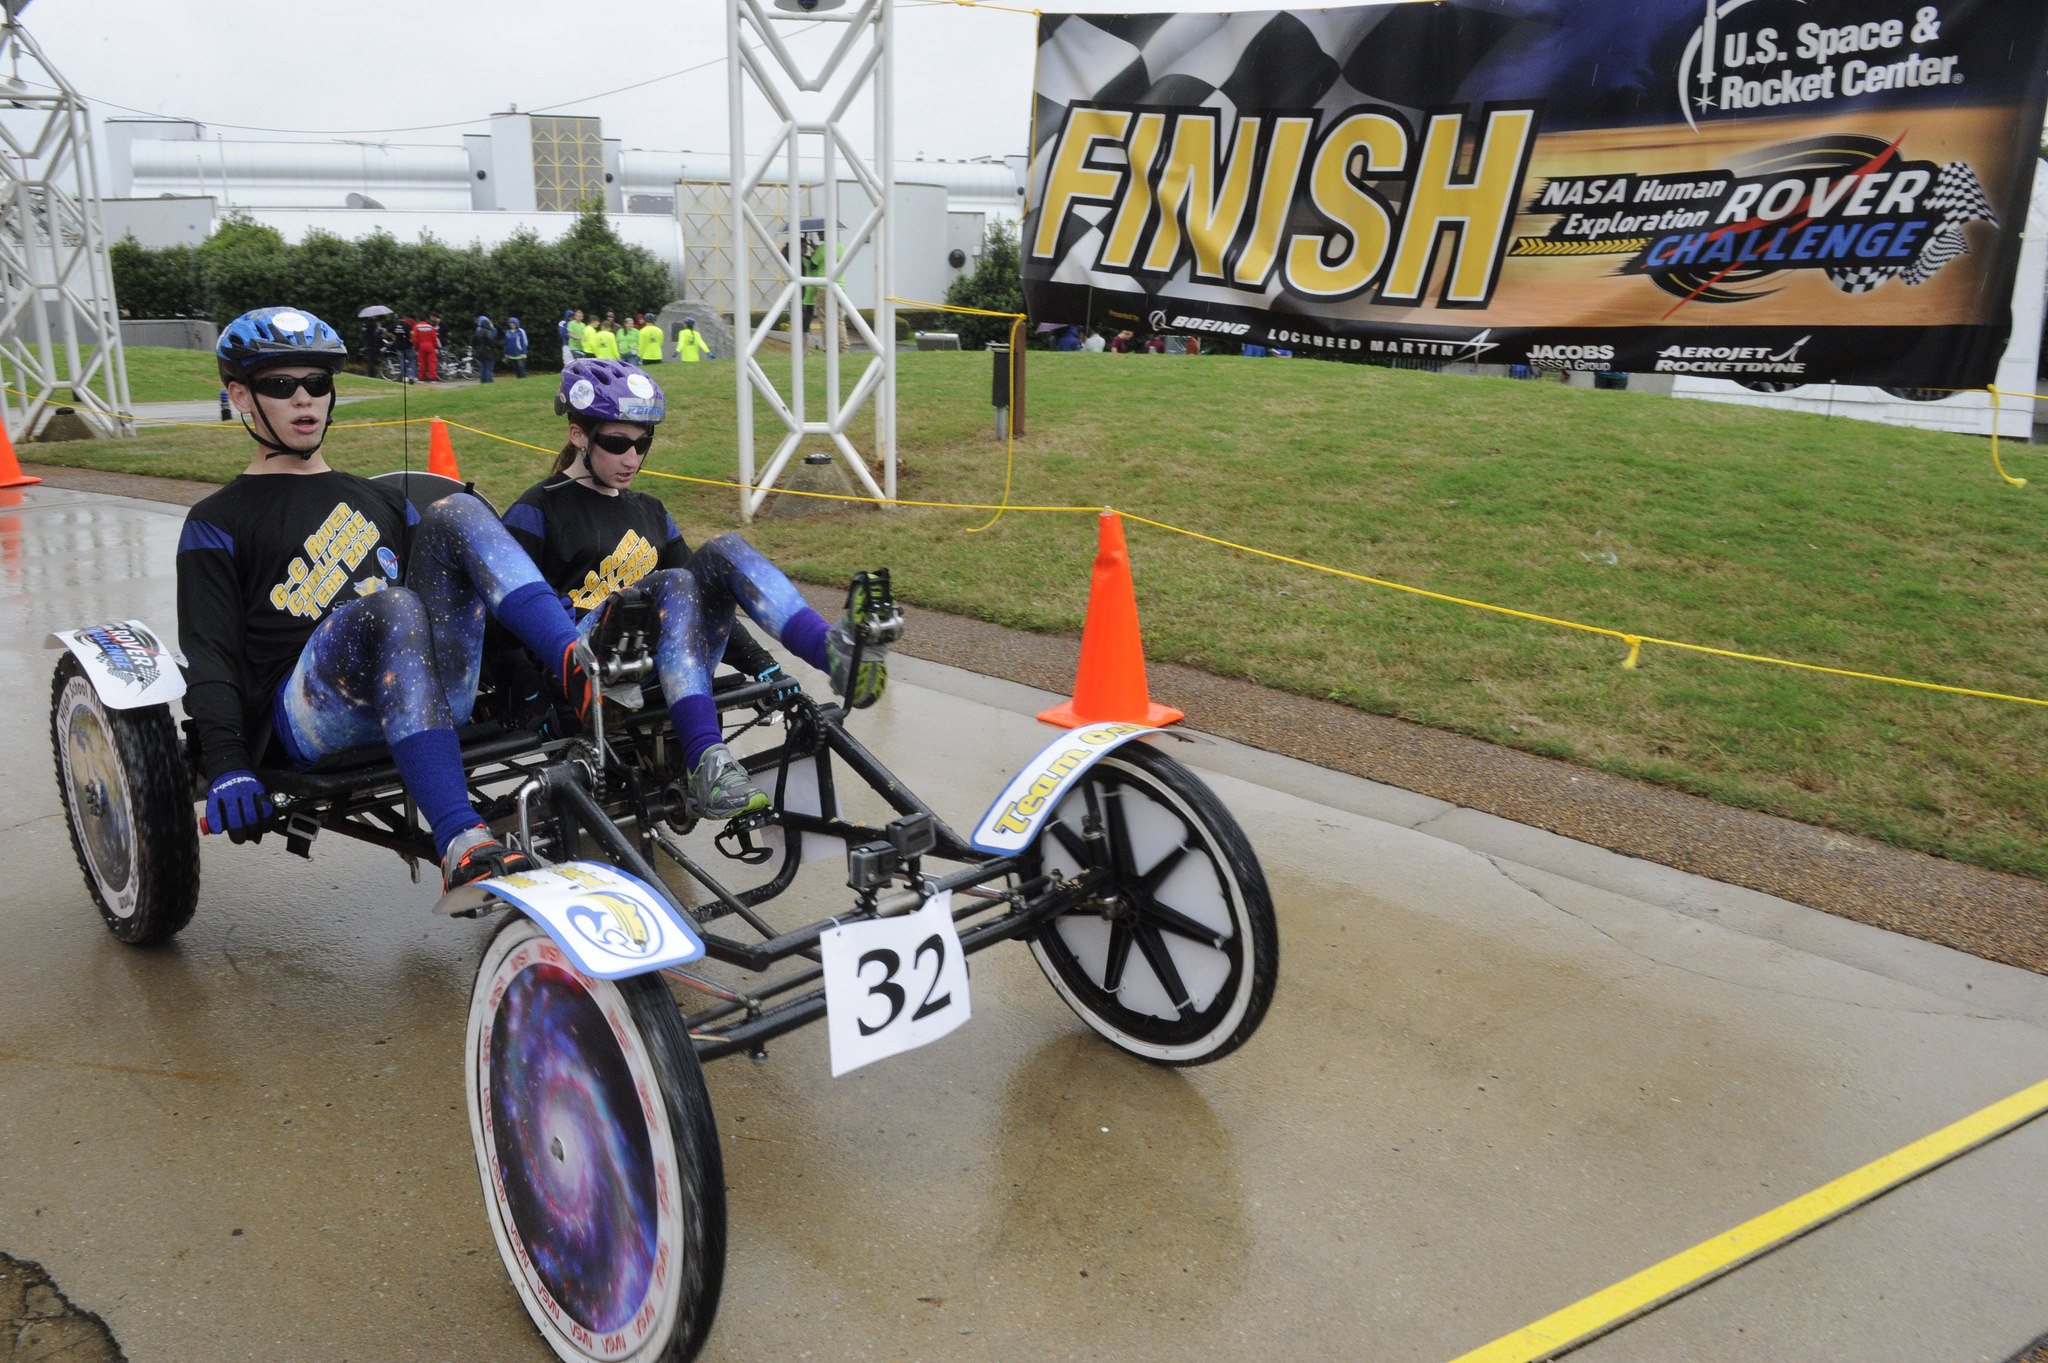 The Greenfield Central High School Rover Team crosses the finish line during the 2015 Human Exploration Rover Challenge.